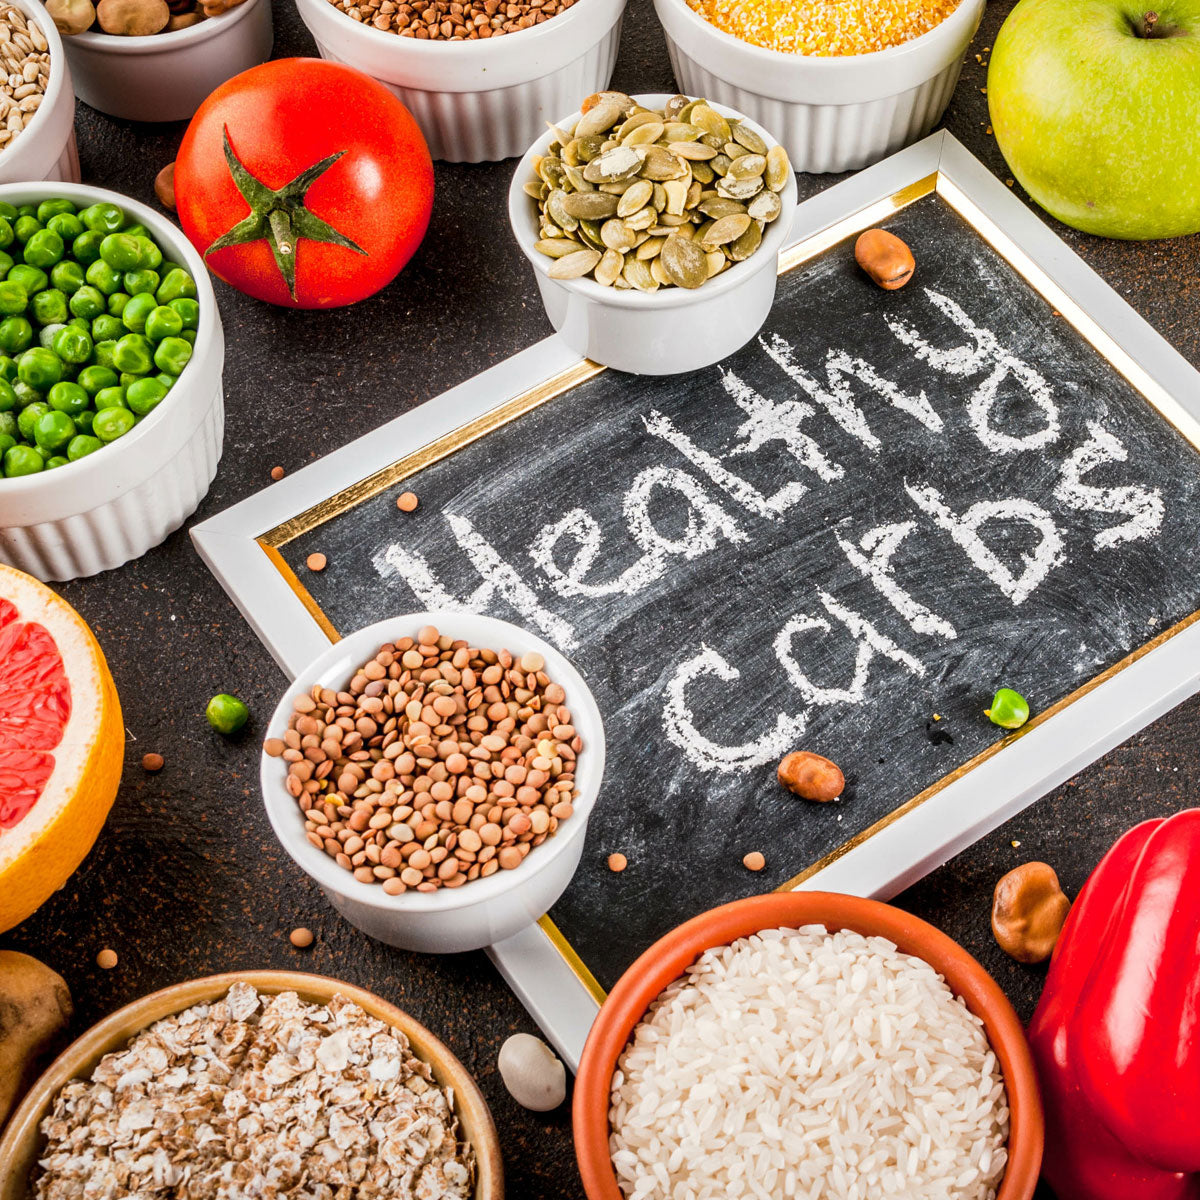 Carbs 101: The Benefits of Carbohydrates